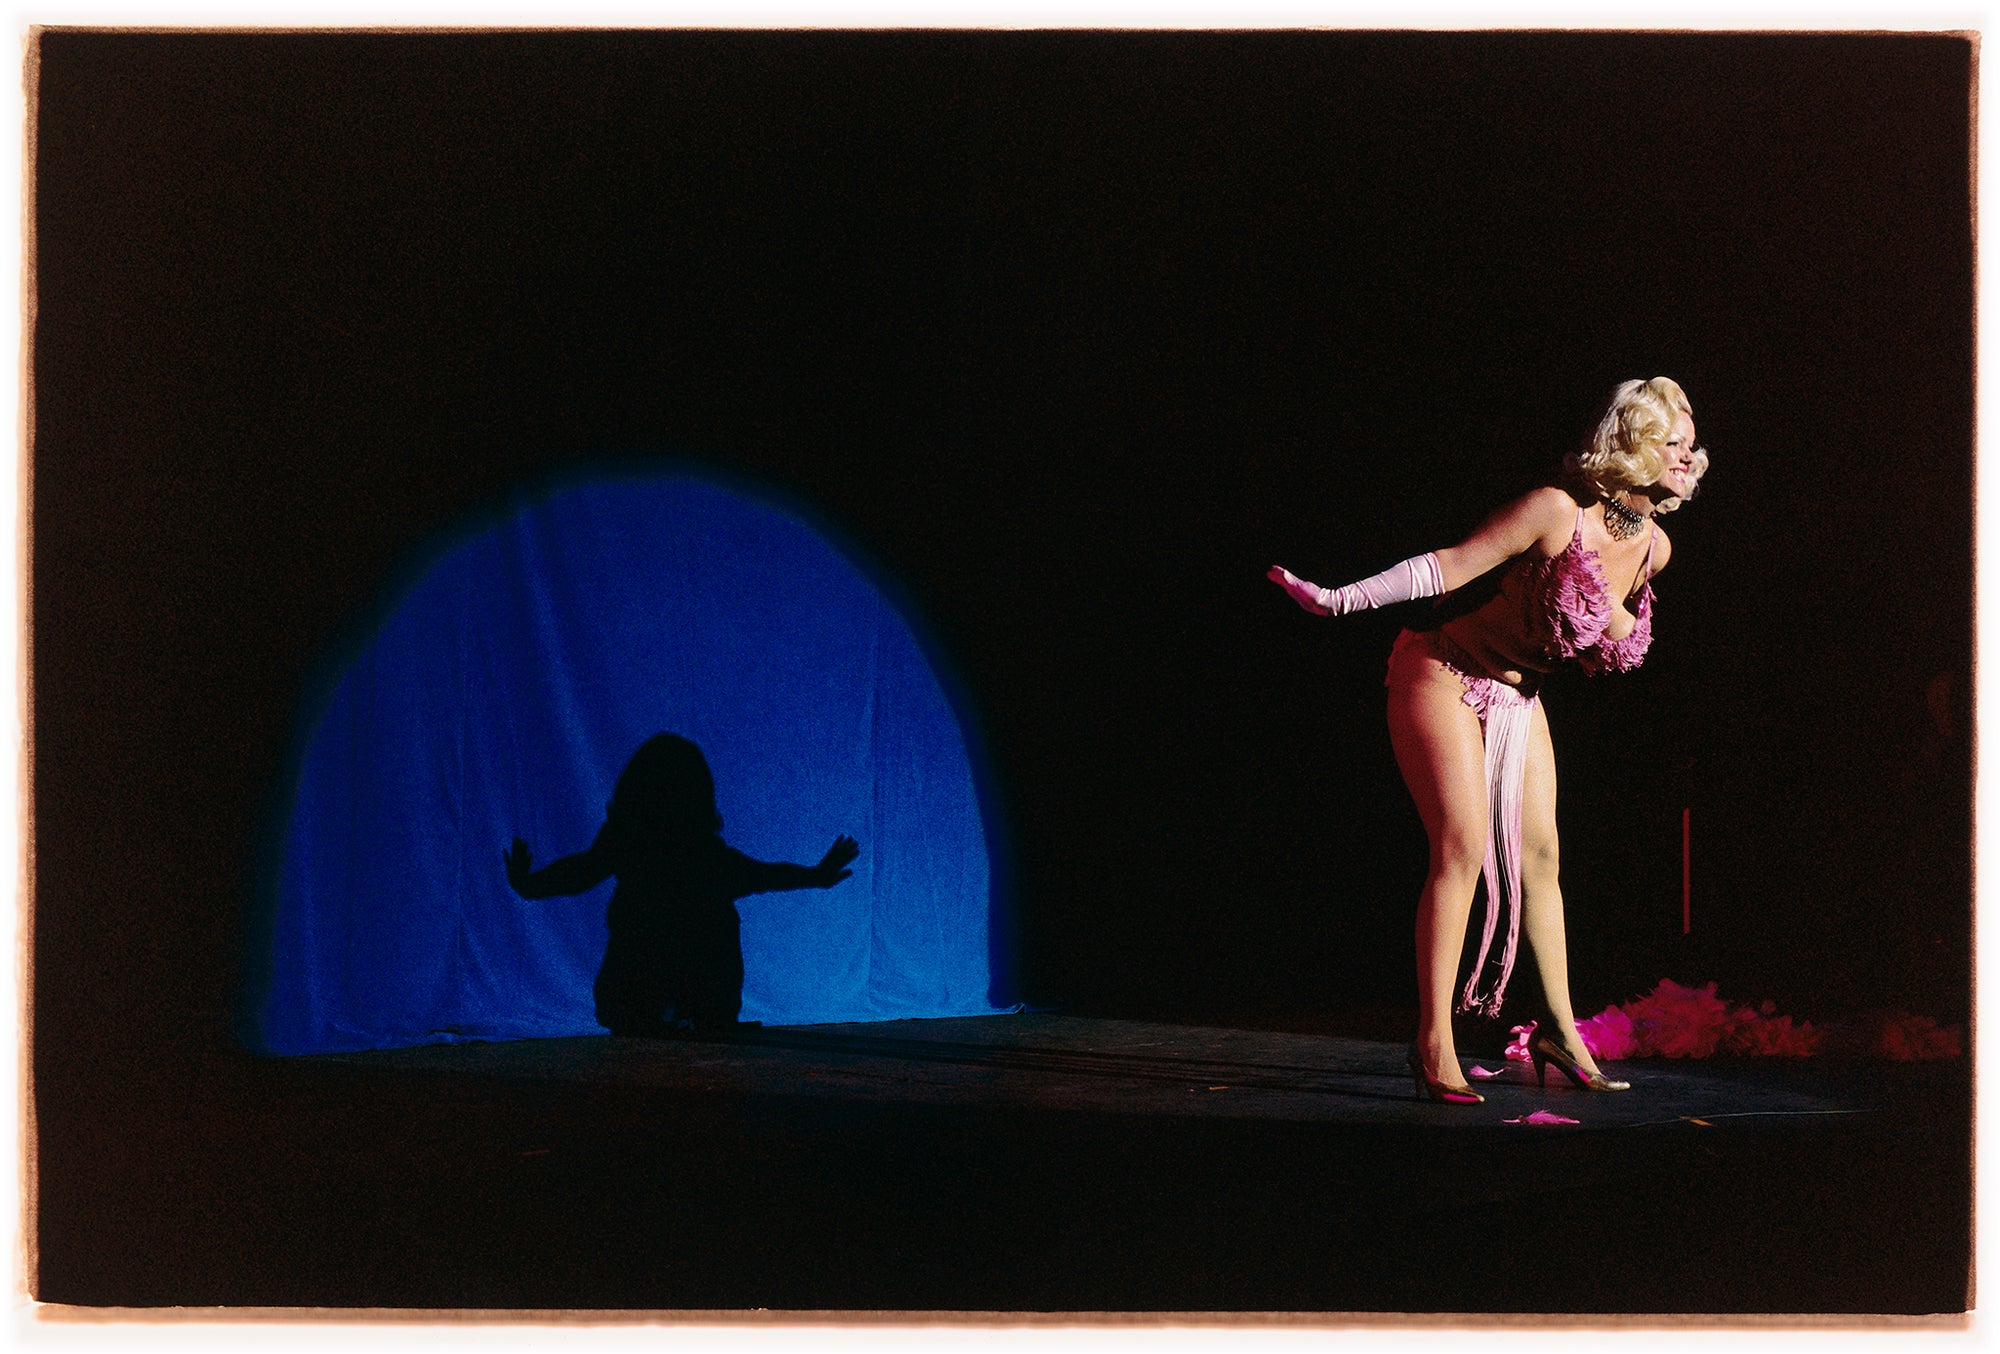 Photograh by Richard Heeps. A Burlesque dancer with a pink fluffy bikini bows on a black stage, in the background is a blue circle containing her silhouette.